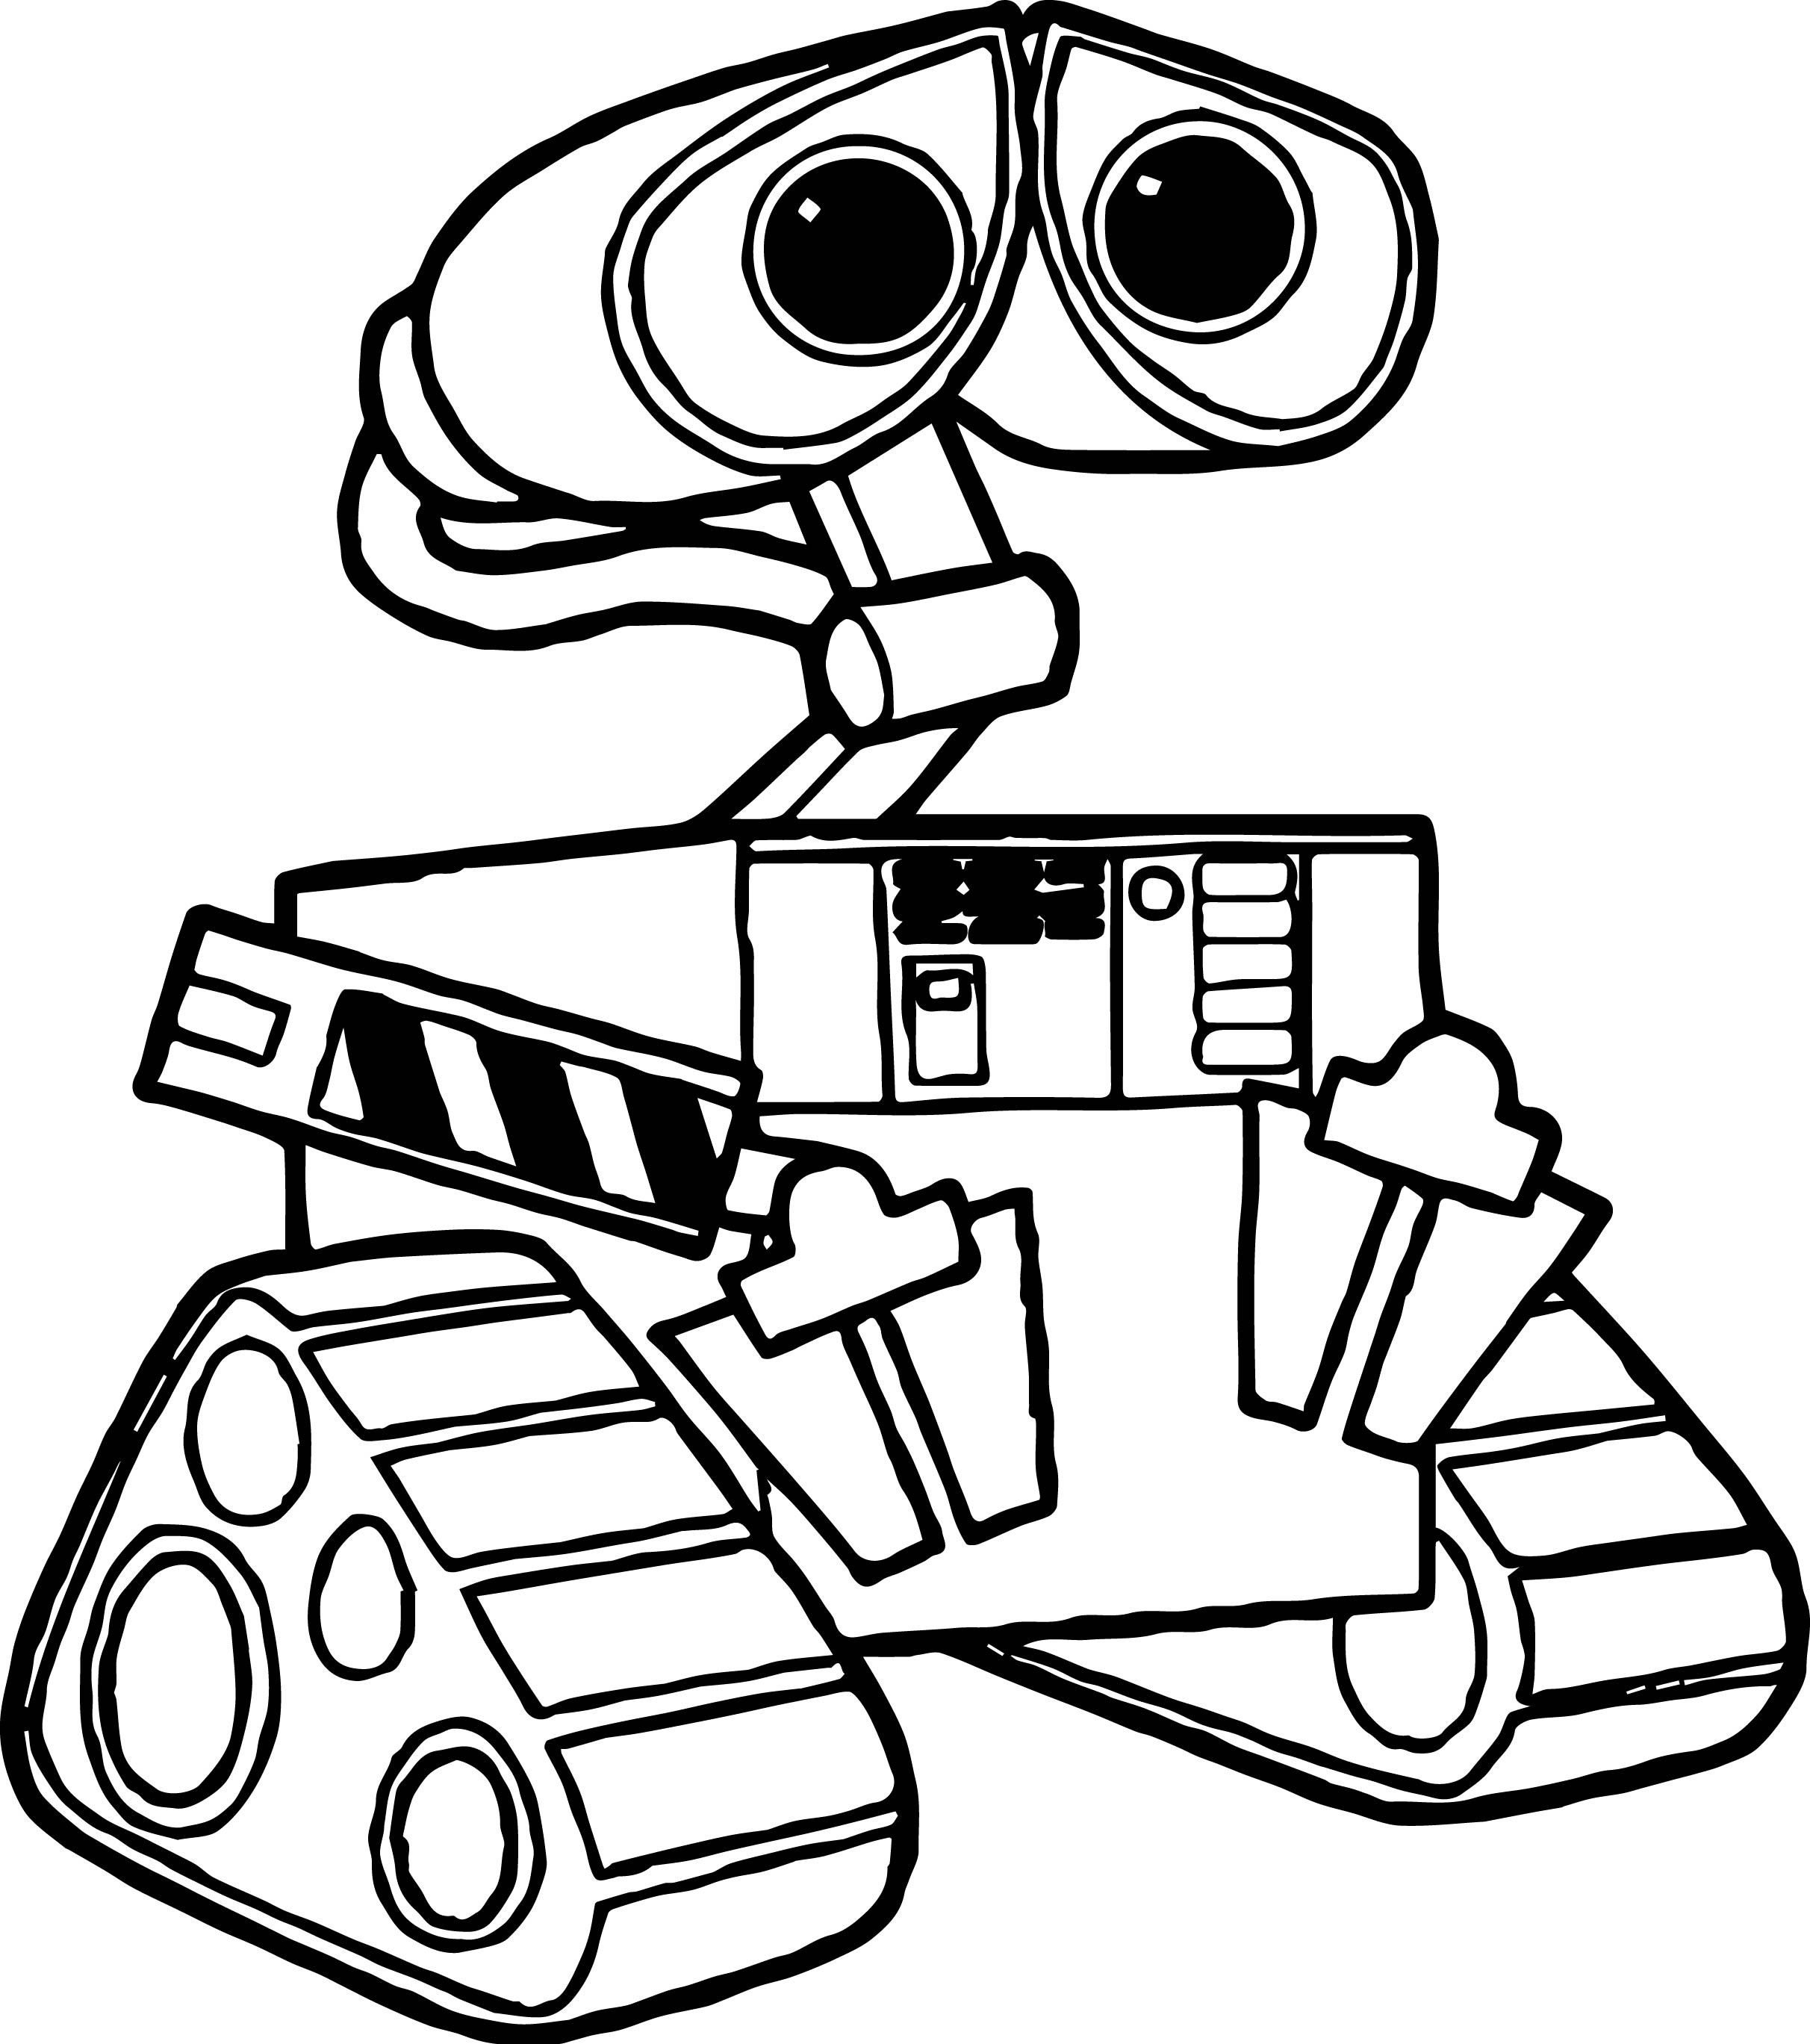 Wall E And Eve Coloring Pages Coloring Pages